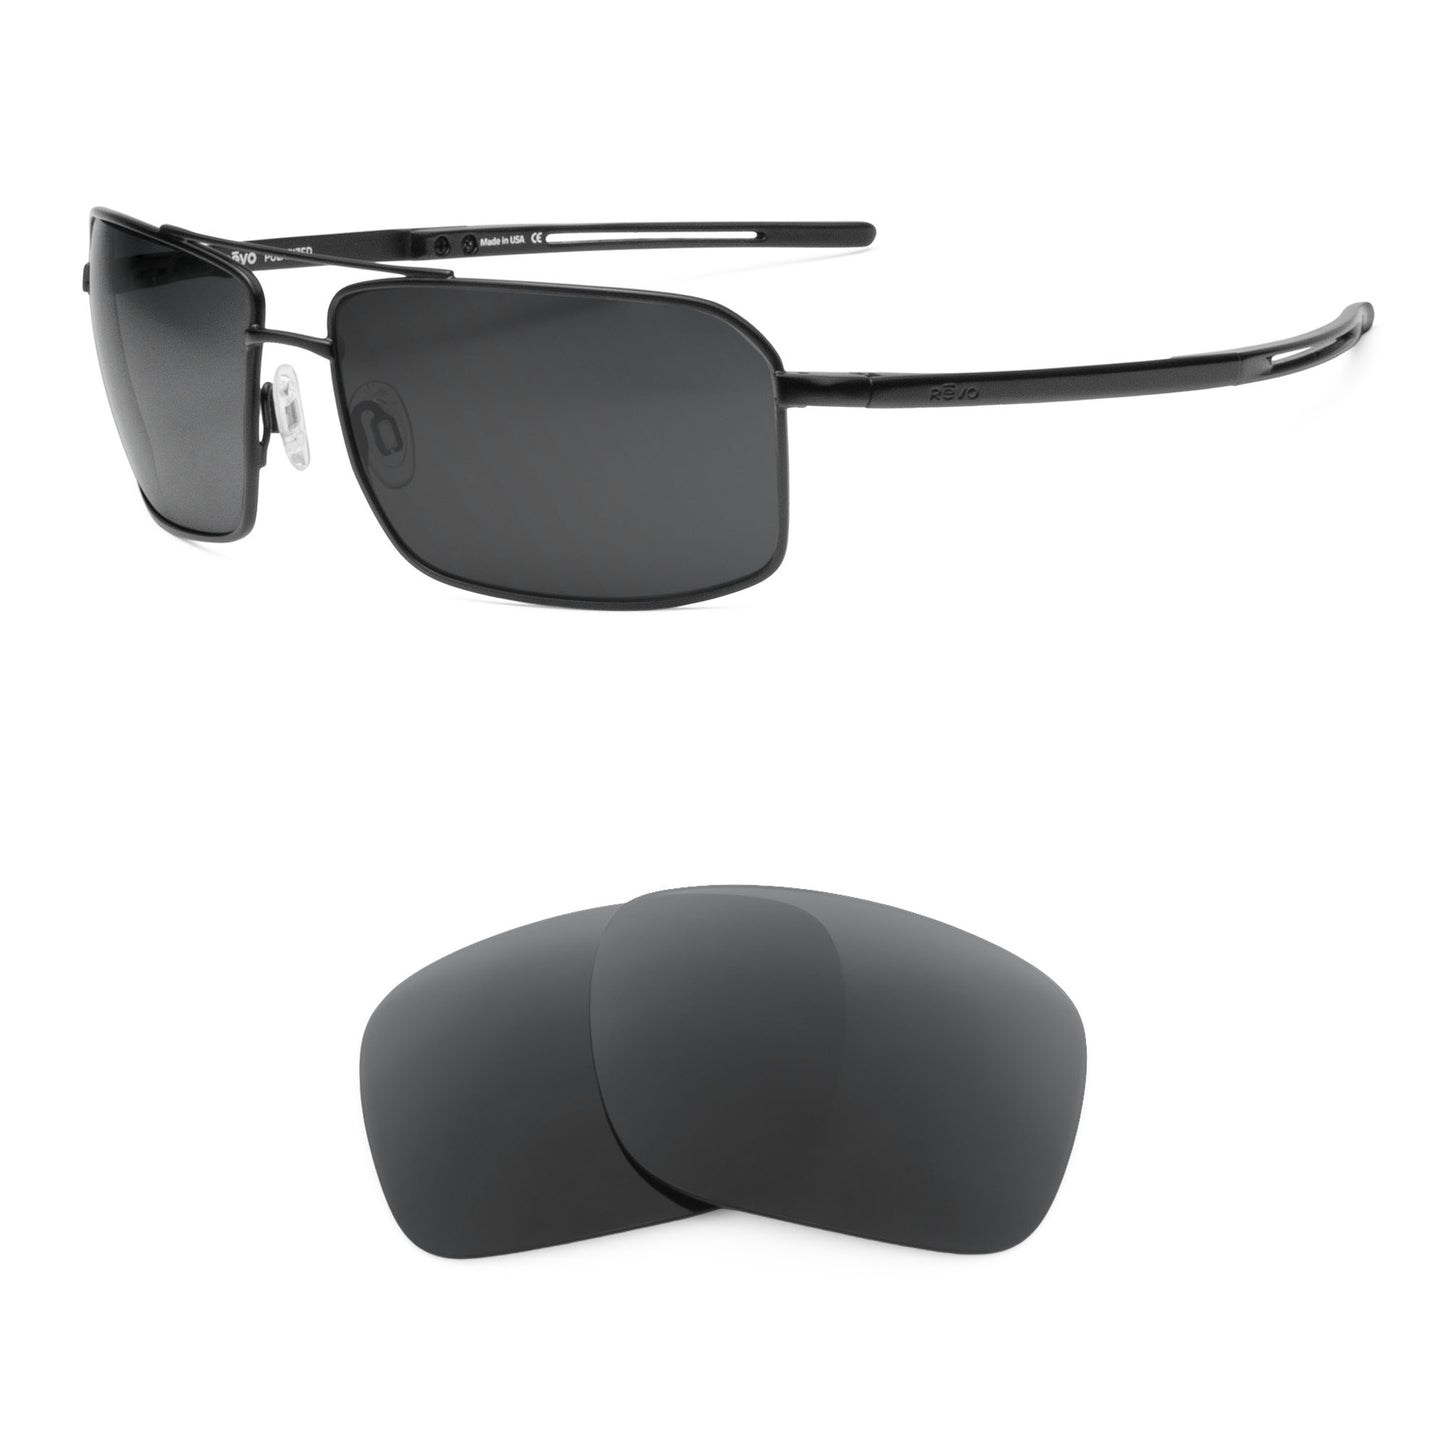 Revo Cayo RE5001X sunglasses with replacement lenses